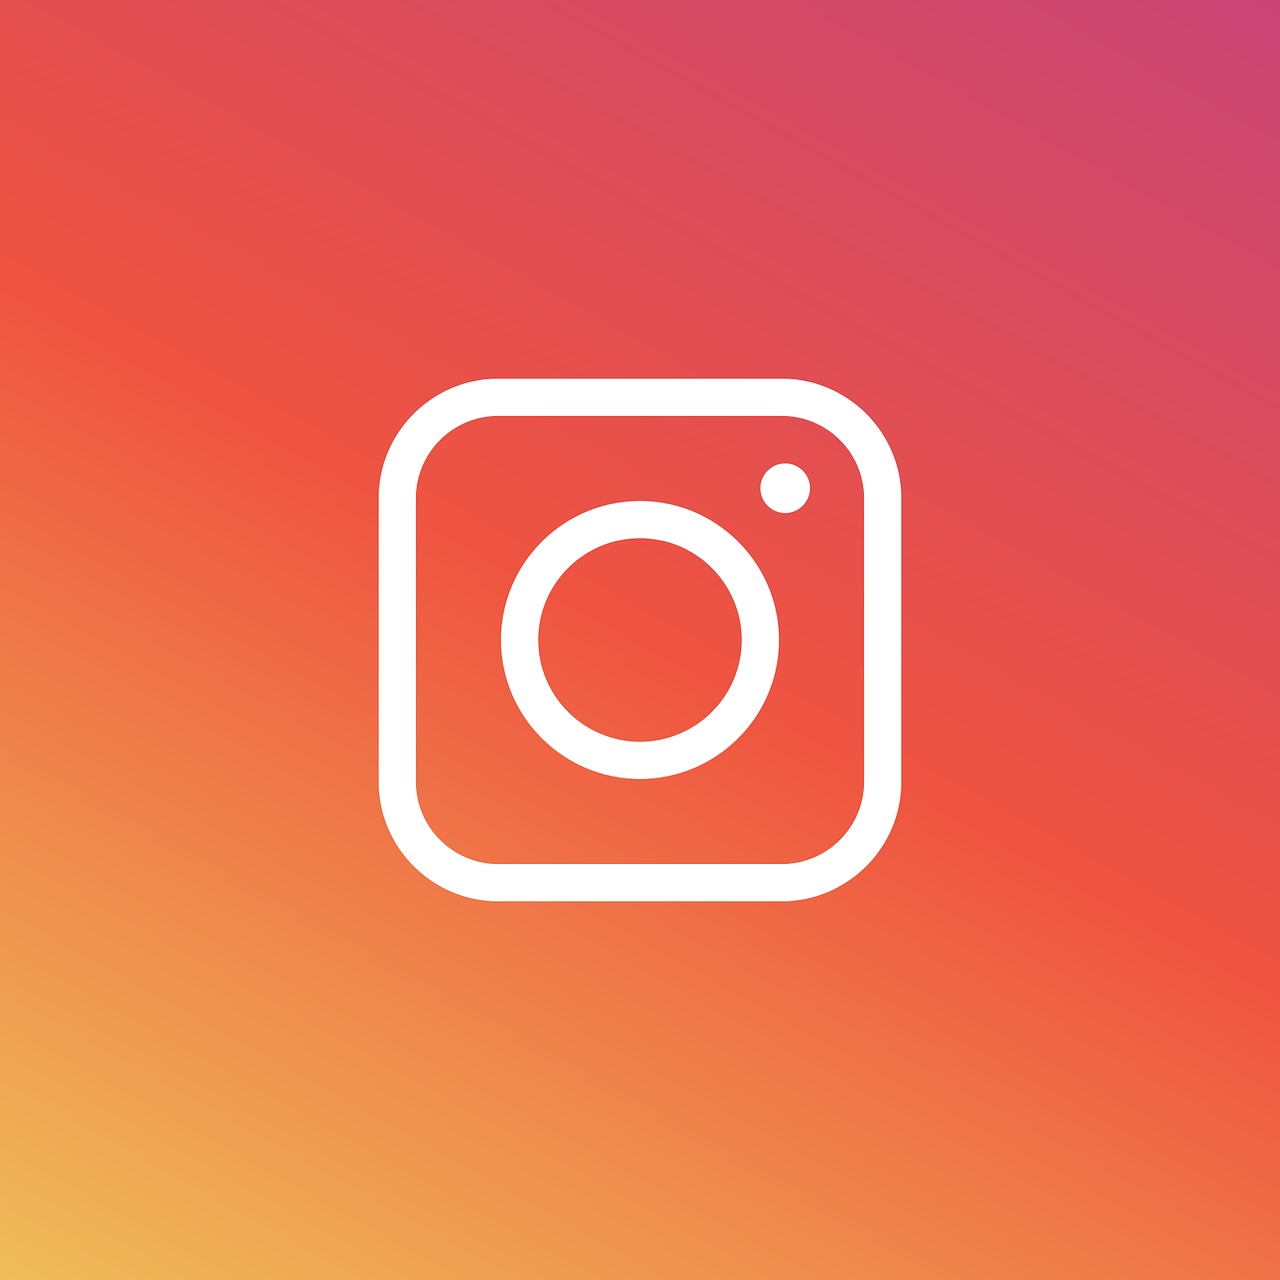 How To Upload Instagram Stories With Picture Longer Than 5 Seconds